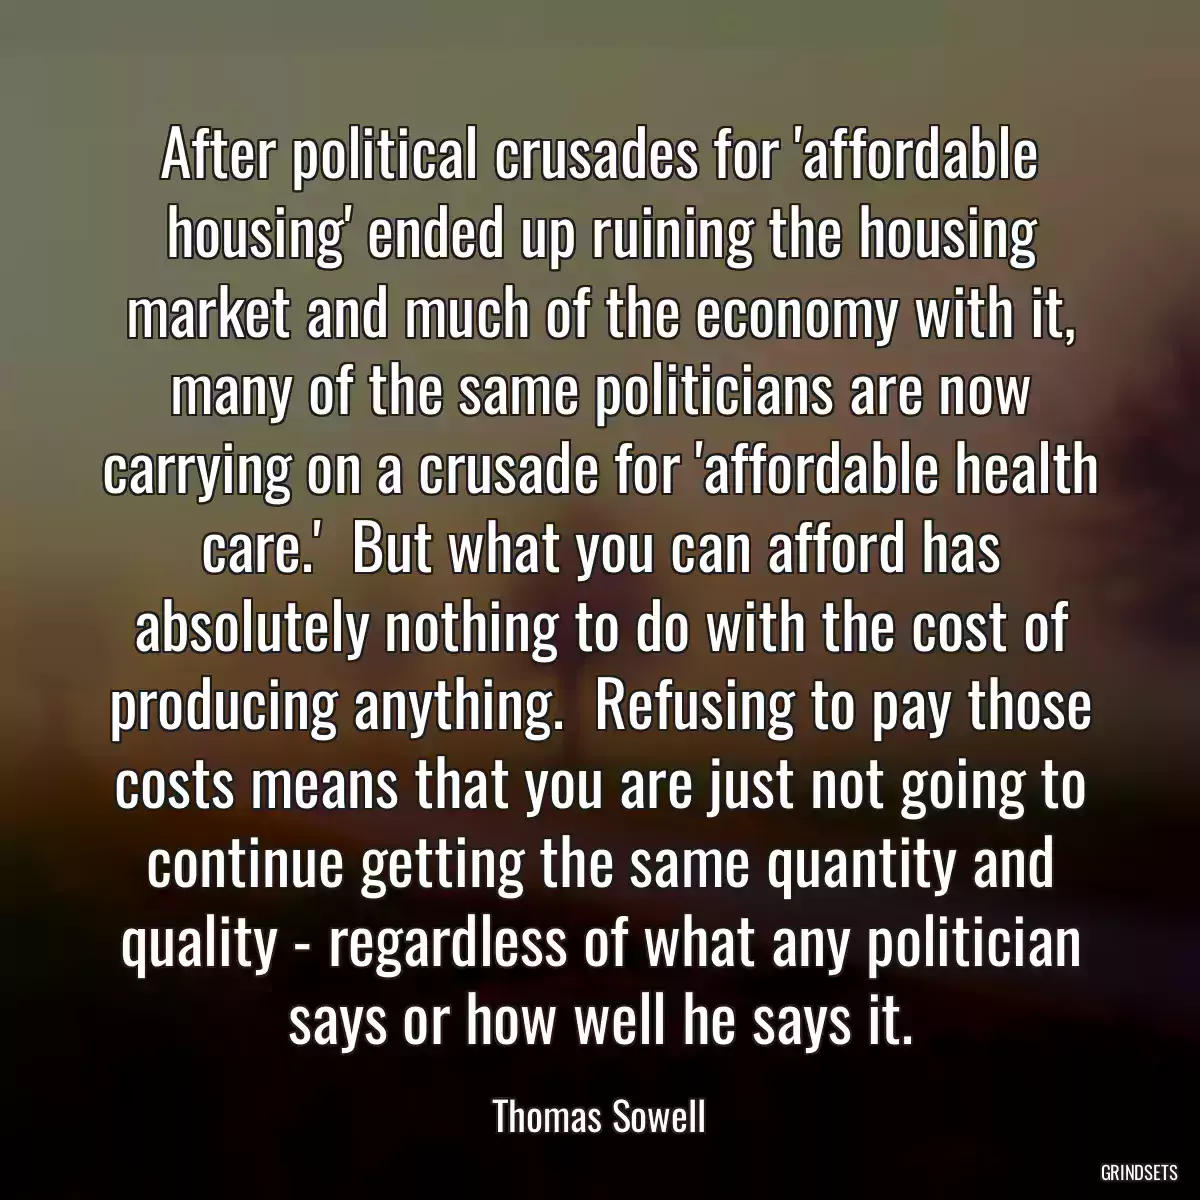 After political crusades for \'affordable housing\' ended up ruining the housing market and much of the economy with it, many of the same politicians are now carrying on a crusade for \'affordable health care.\'  But what you can afford has absolutely nothing to do with the cost of producing anything.  Refusing to pay those costs means that you are just not going to continue getting the same quantity and quality - regardless of what any politician says or how well he says it.